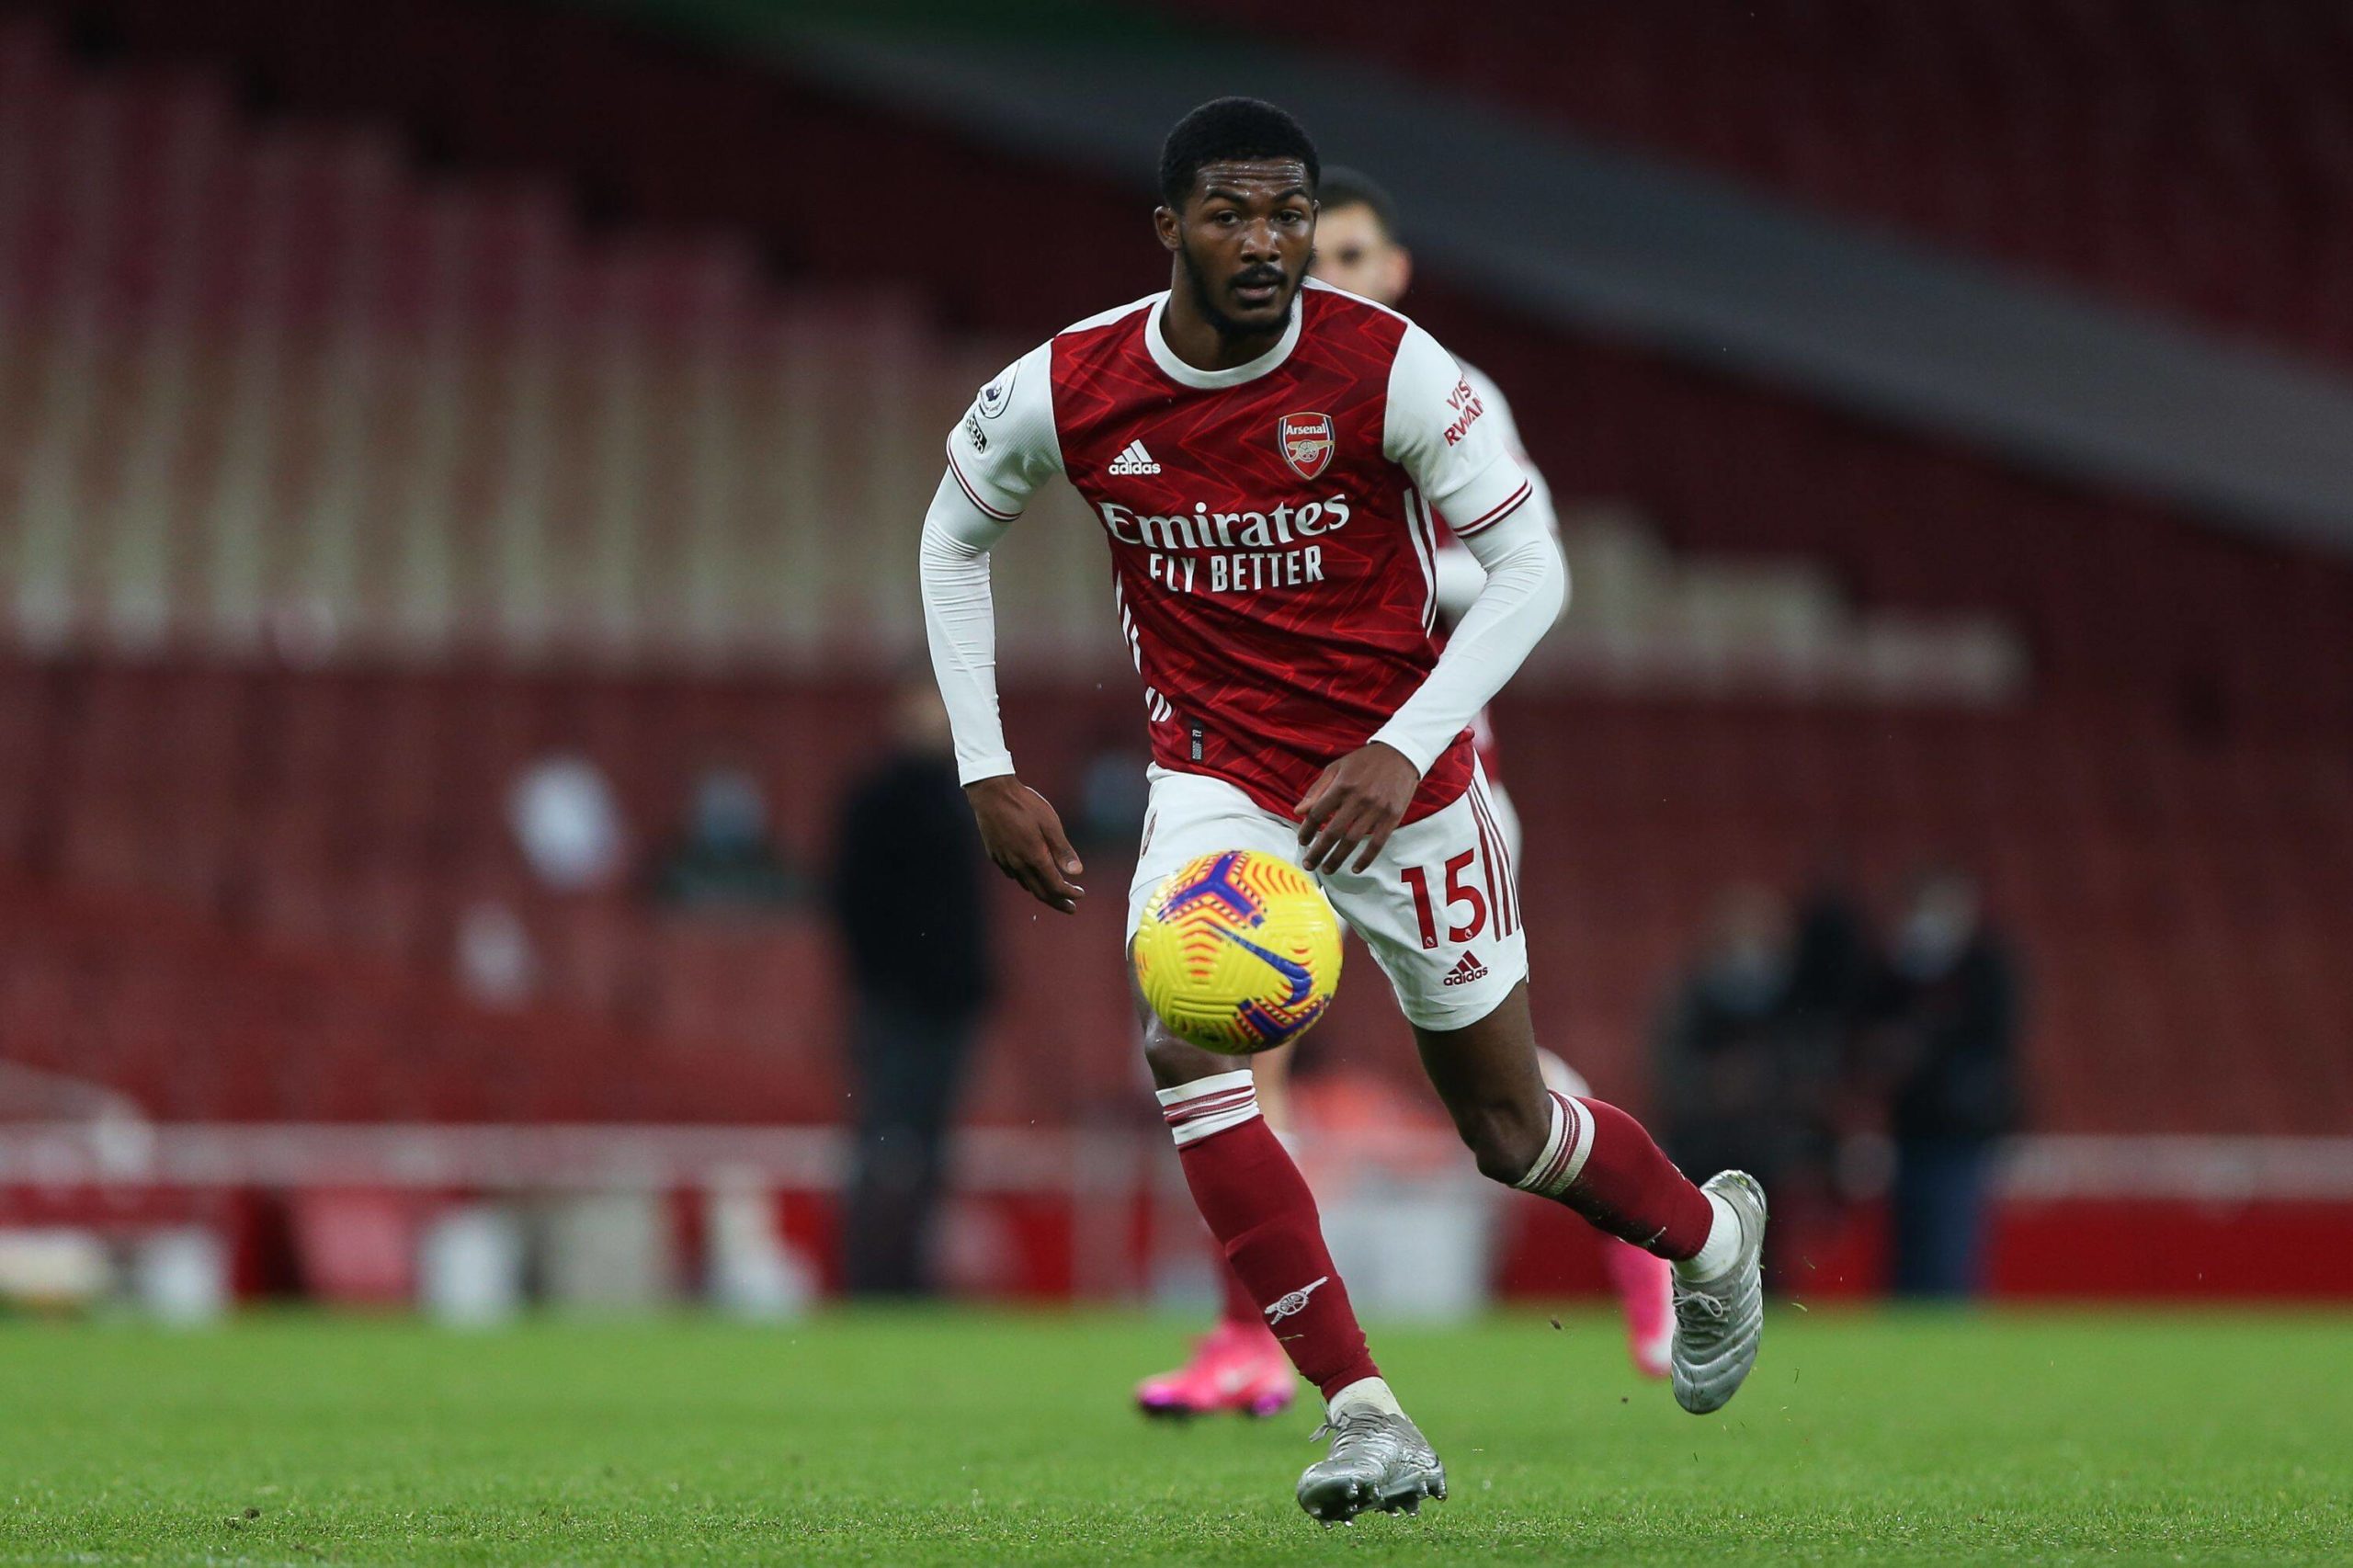 Leicester locked in a three-way battle for Maitland-Niles who is seen in the photo